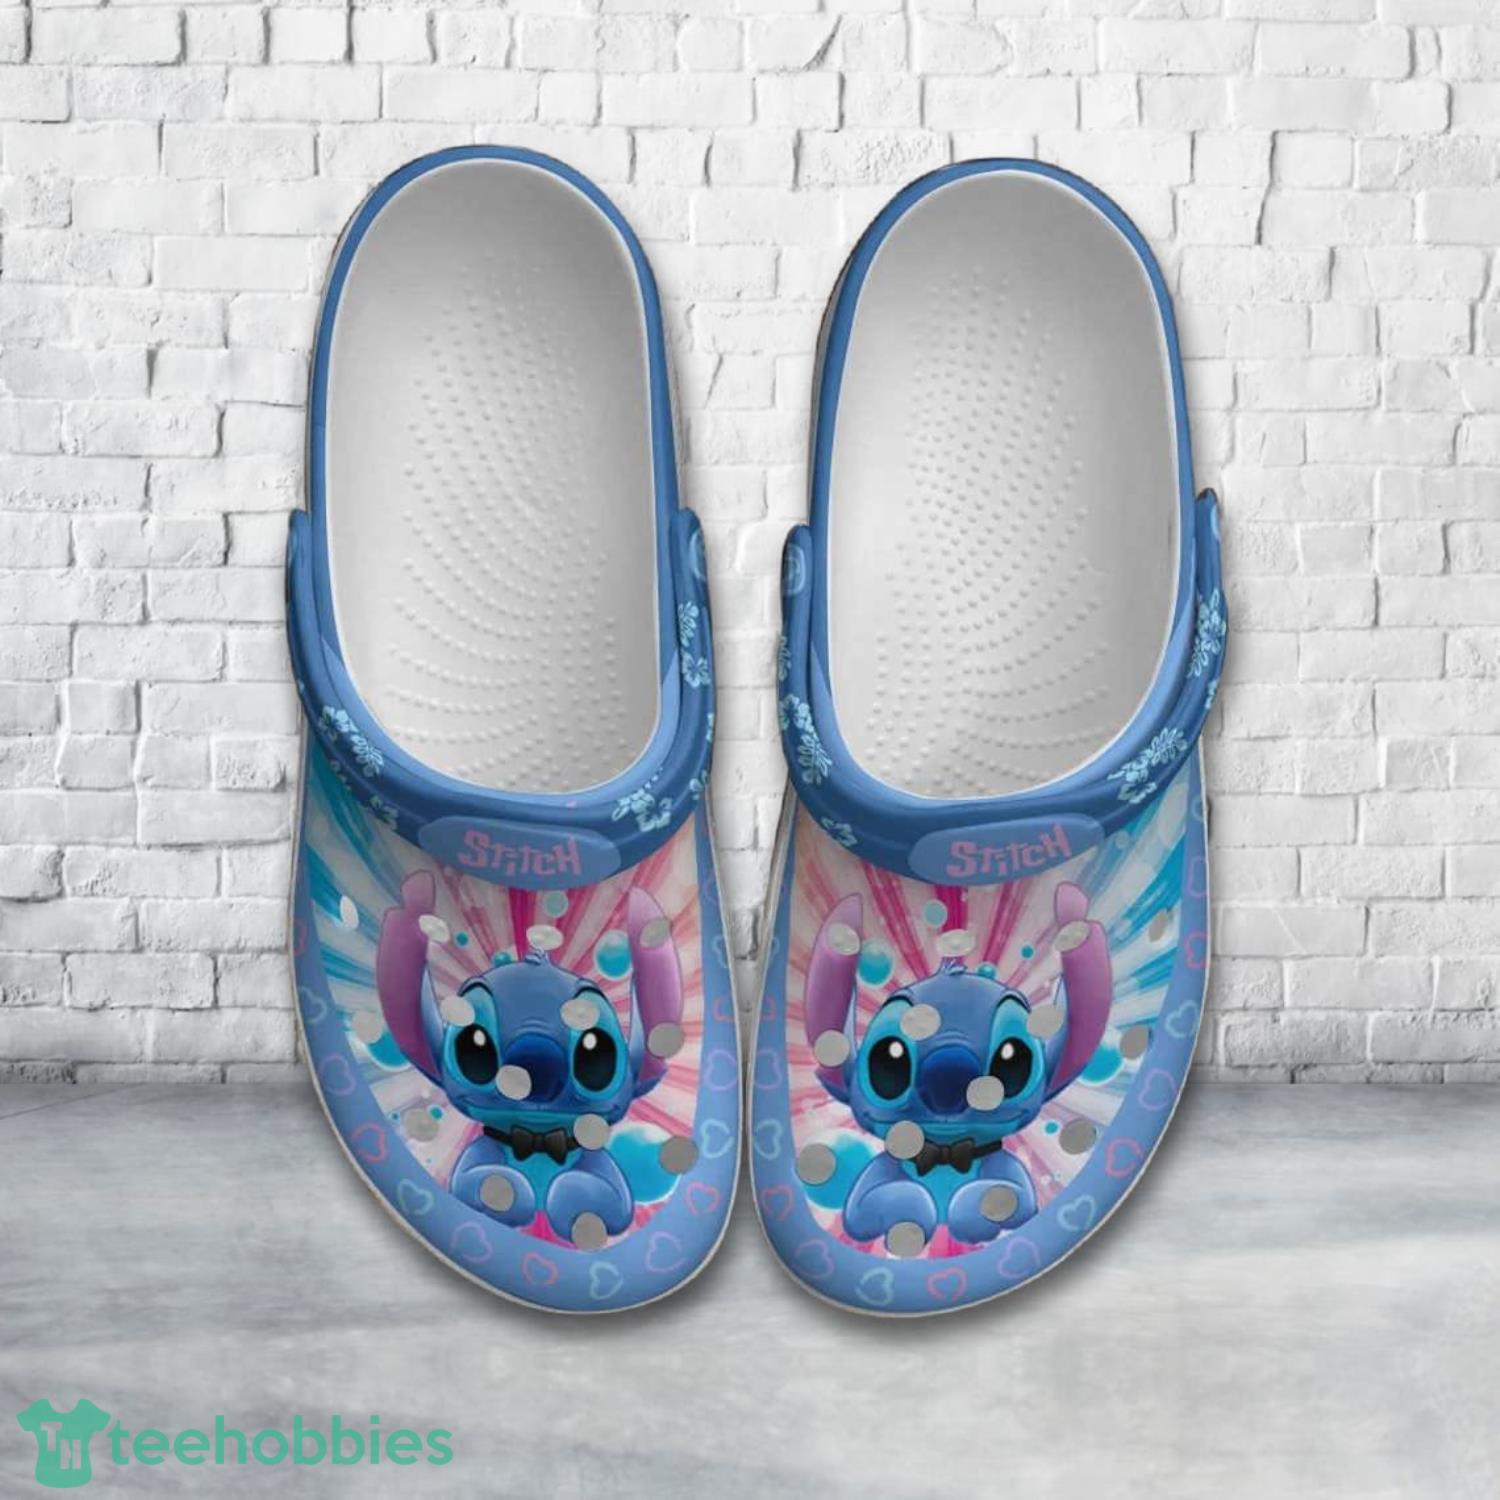 Stitch Floral Heart Patterns Blue Pink Disney Clog Shoes Product Photo 1